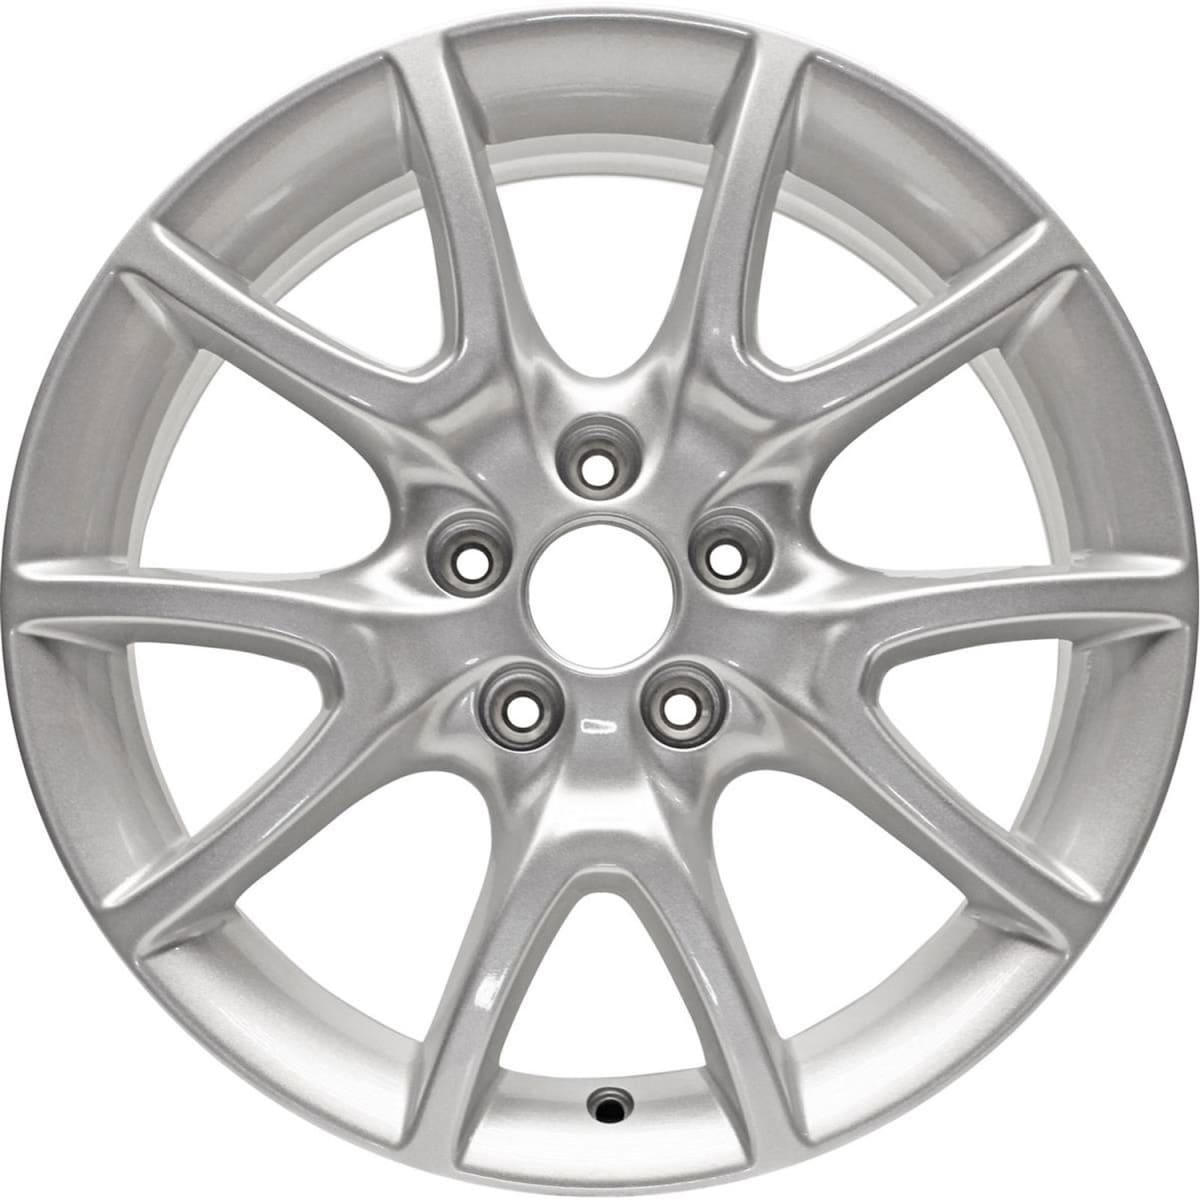 AutoWheels® ALY02445U20N Jante Wheel, Aluminum, Silver, 17 in. x 7.5 in., Sold Individually